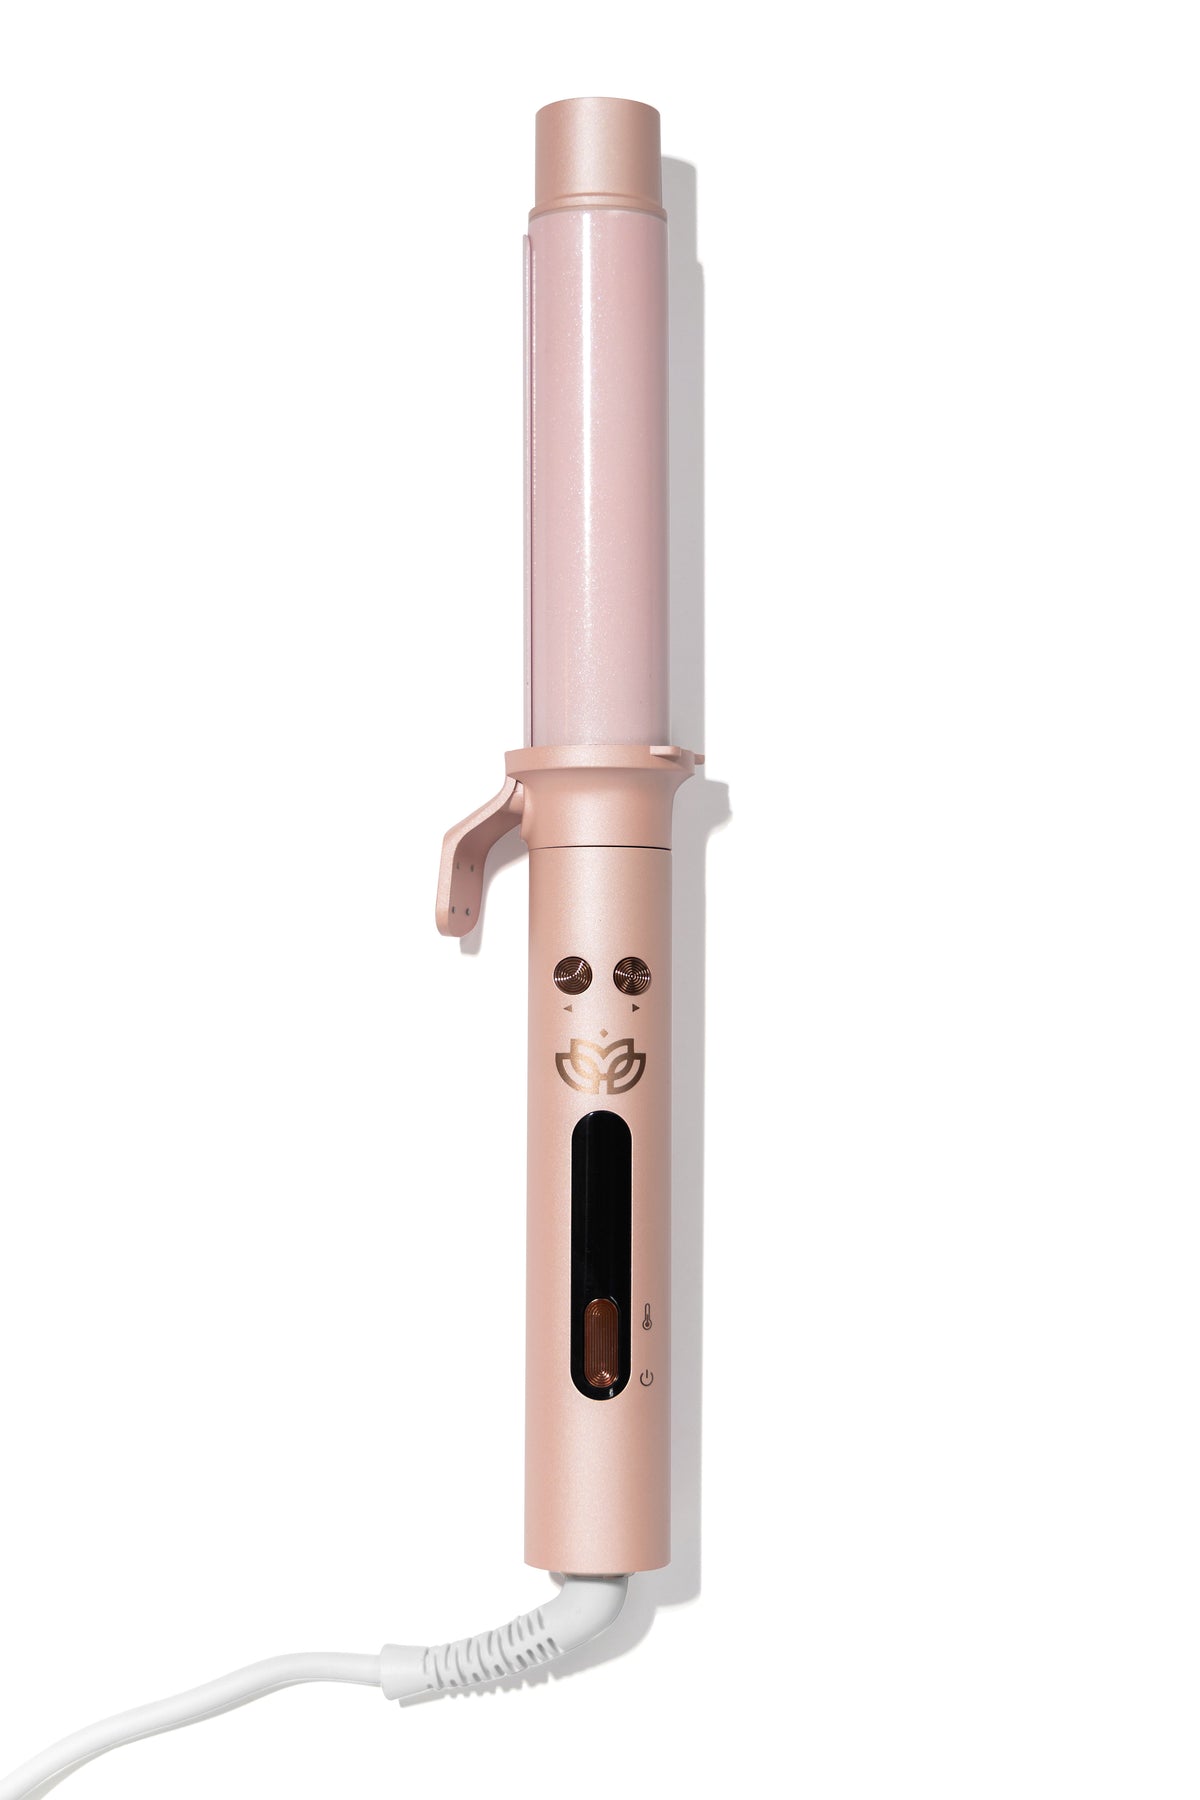 Simply Curl Pro Automatic Hair Curler